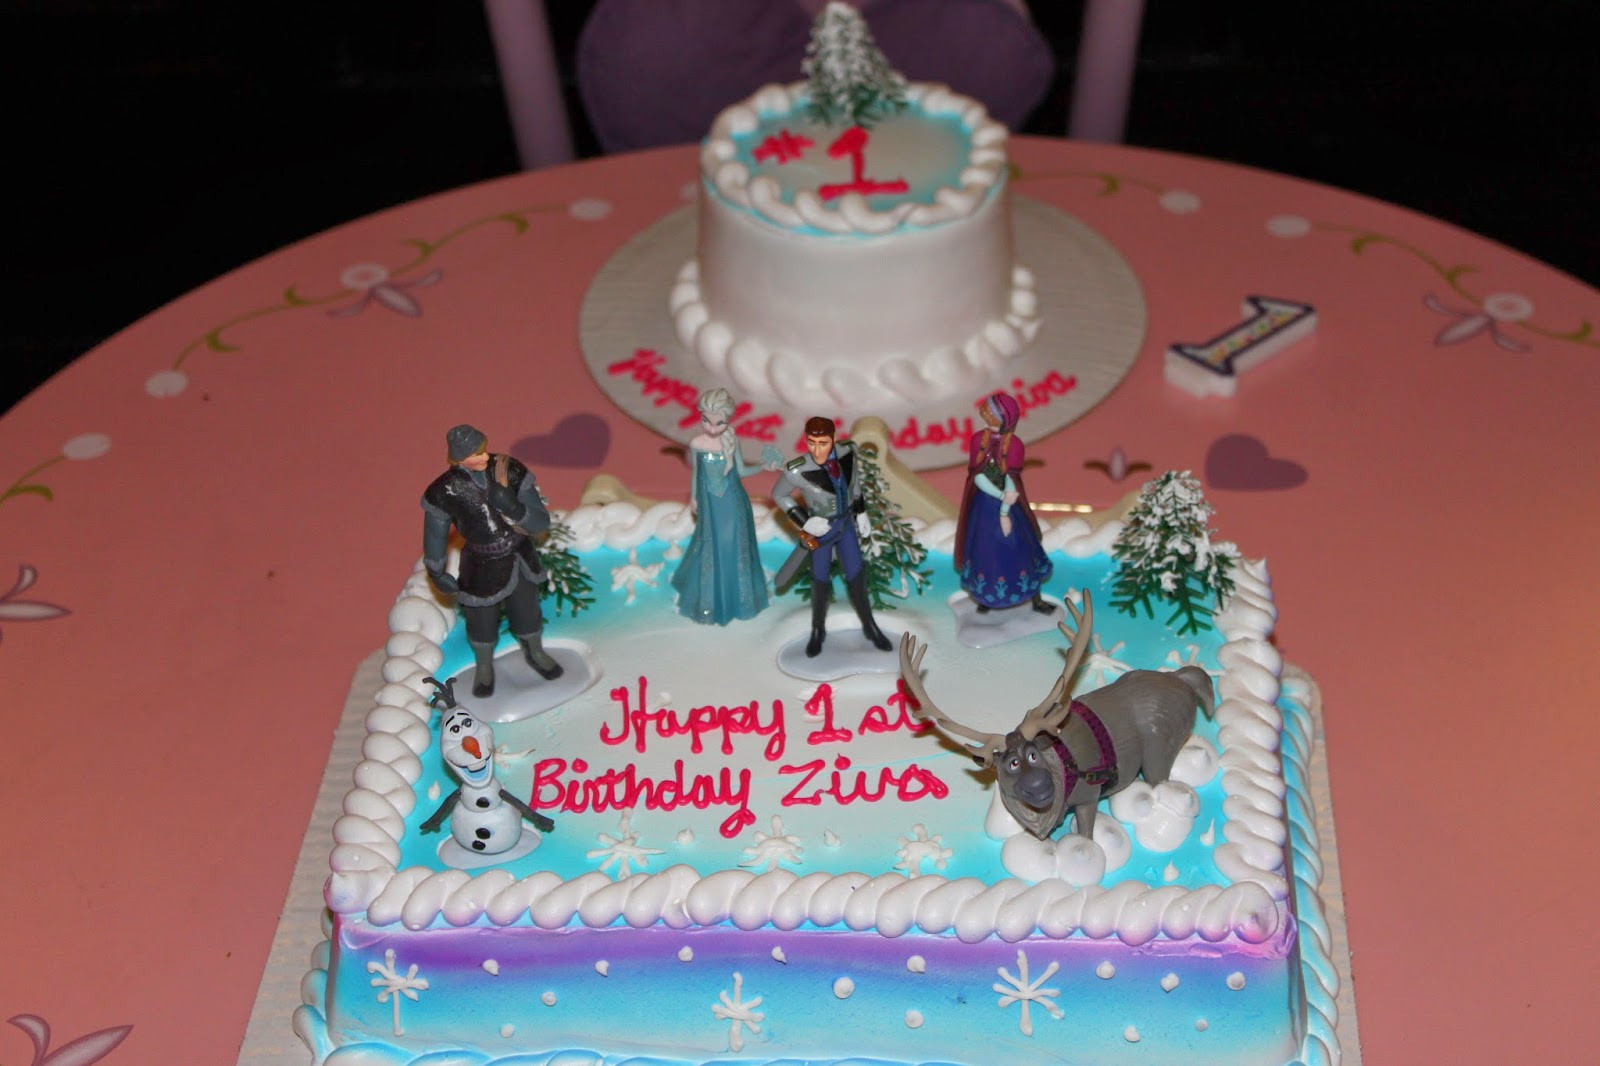 Albertsons Birthday Cake Designs
 31 wife fo life Frozen Party